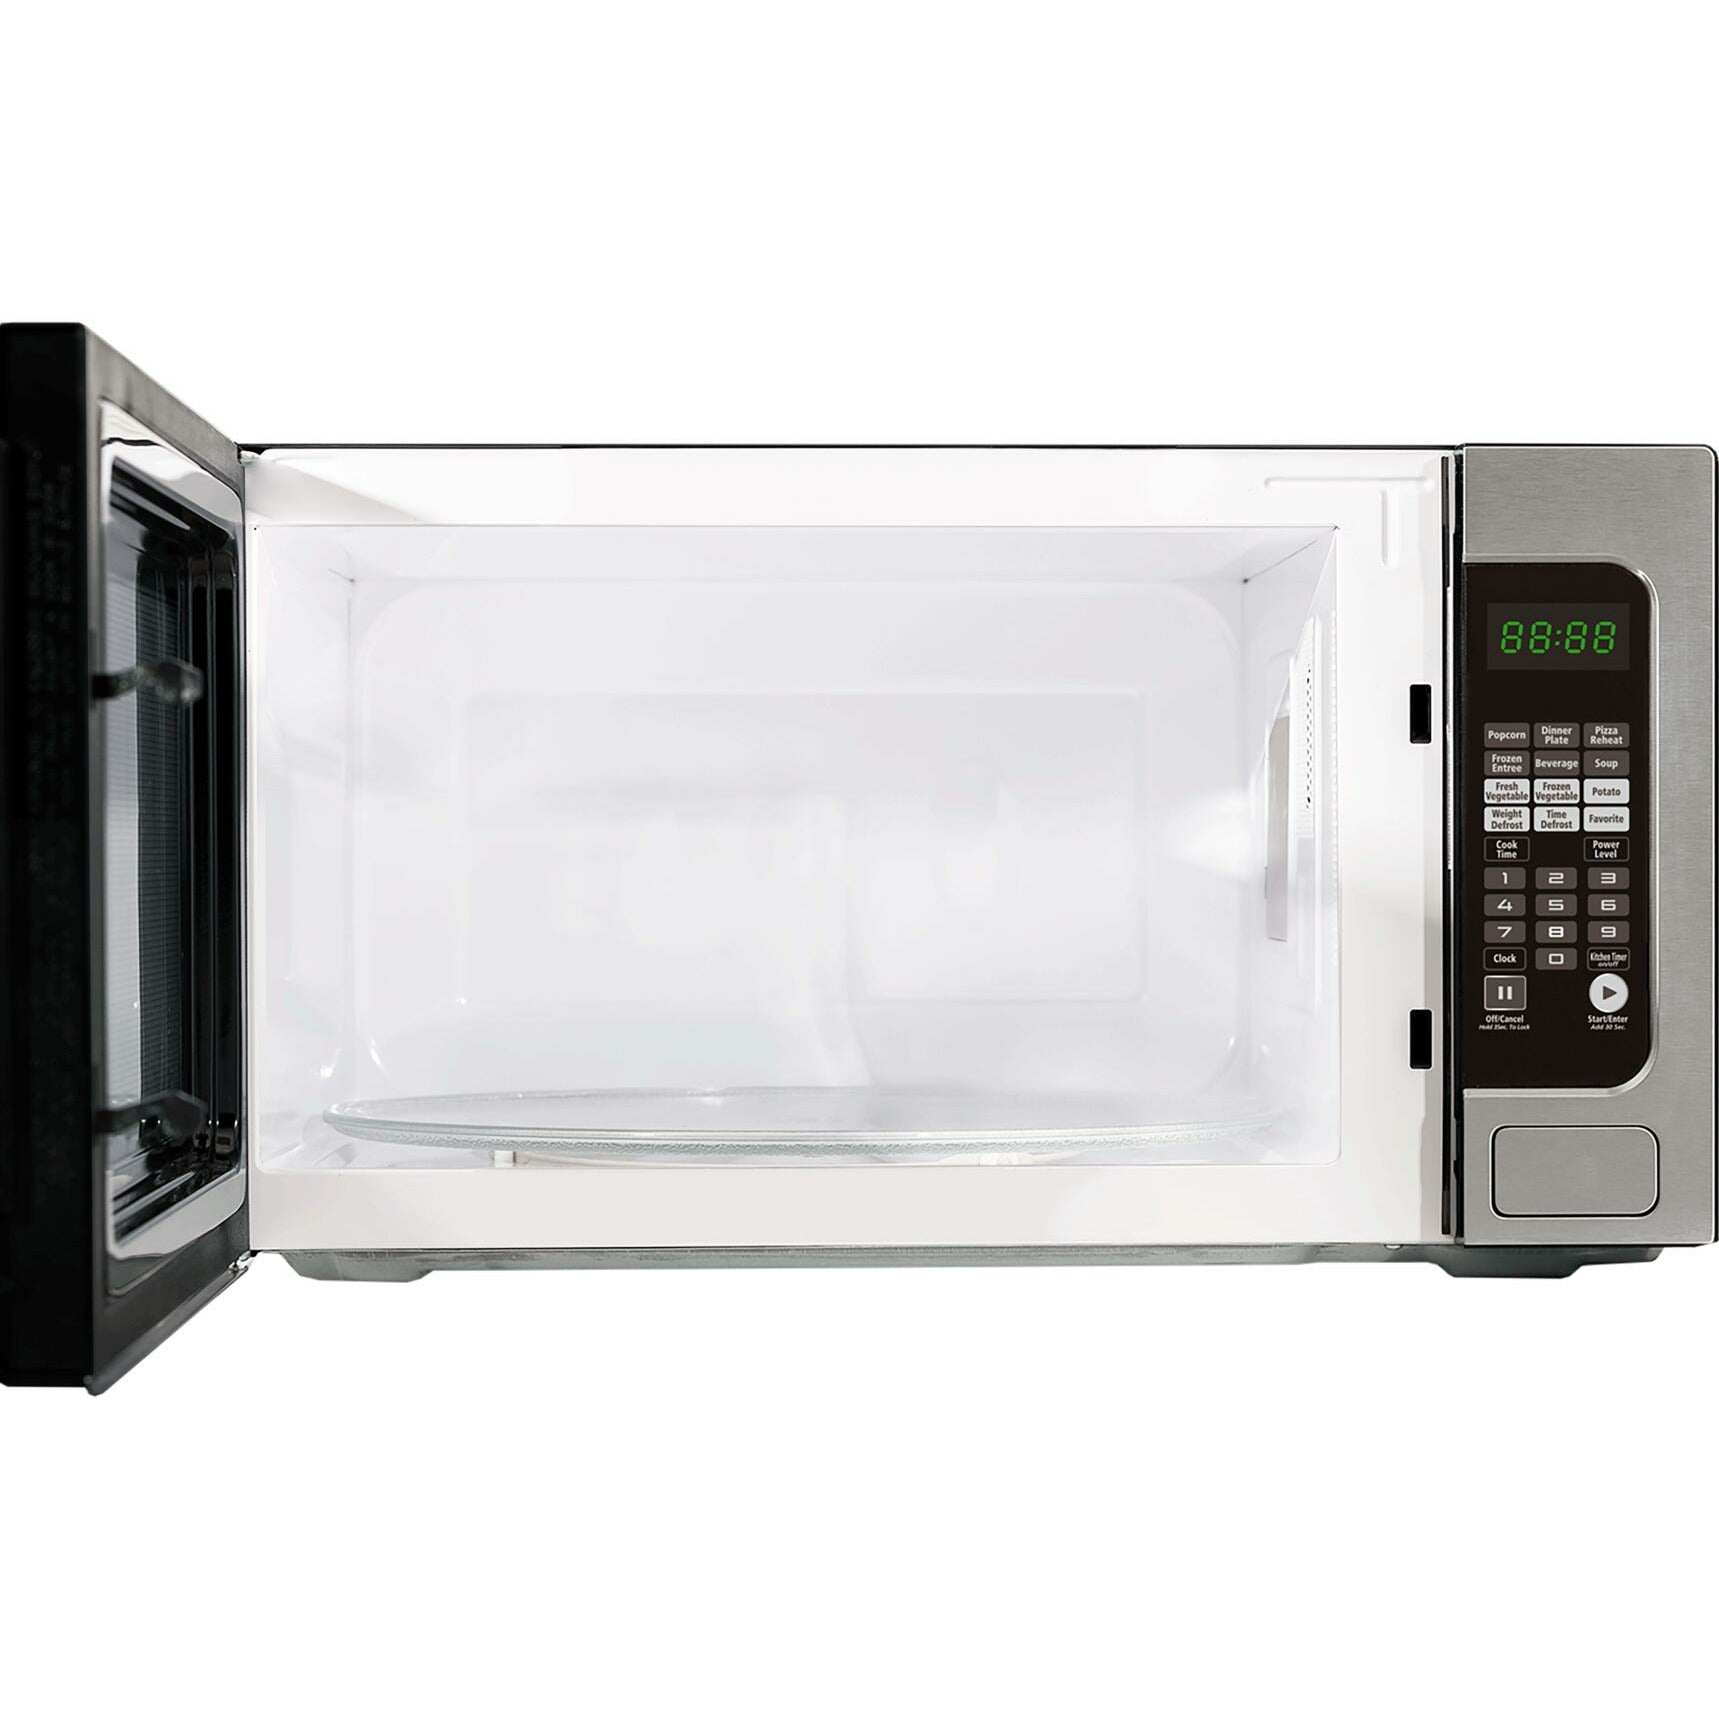 Forte 5 Series 24 Inch 2.2 cu. ft. Capacity Countertop Microwave - F2422MV5SS